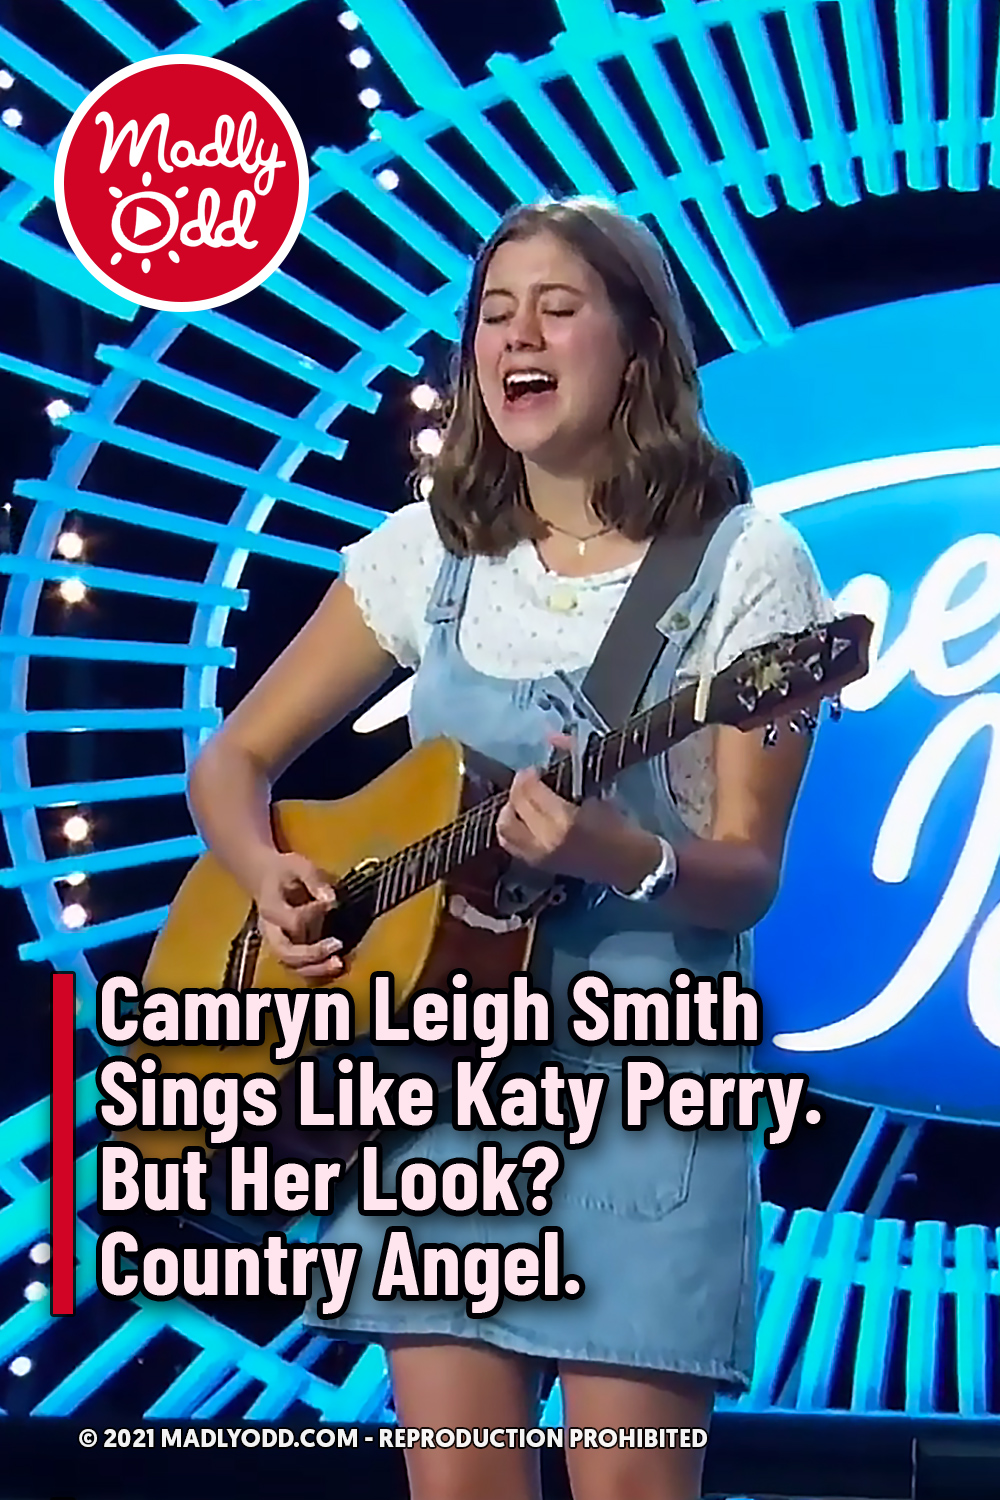 Camryn Leigh Smith Sings Like Katy Perry. But Her Look? Country Angel